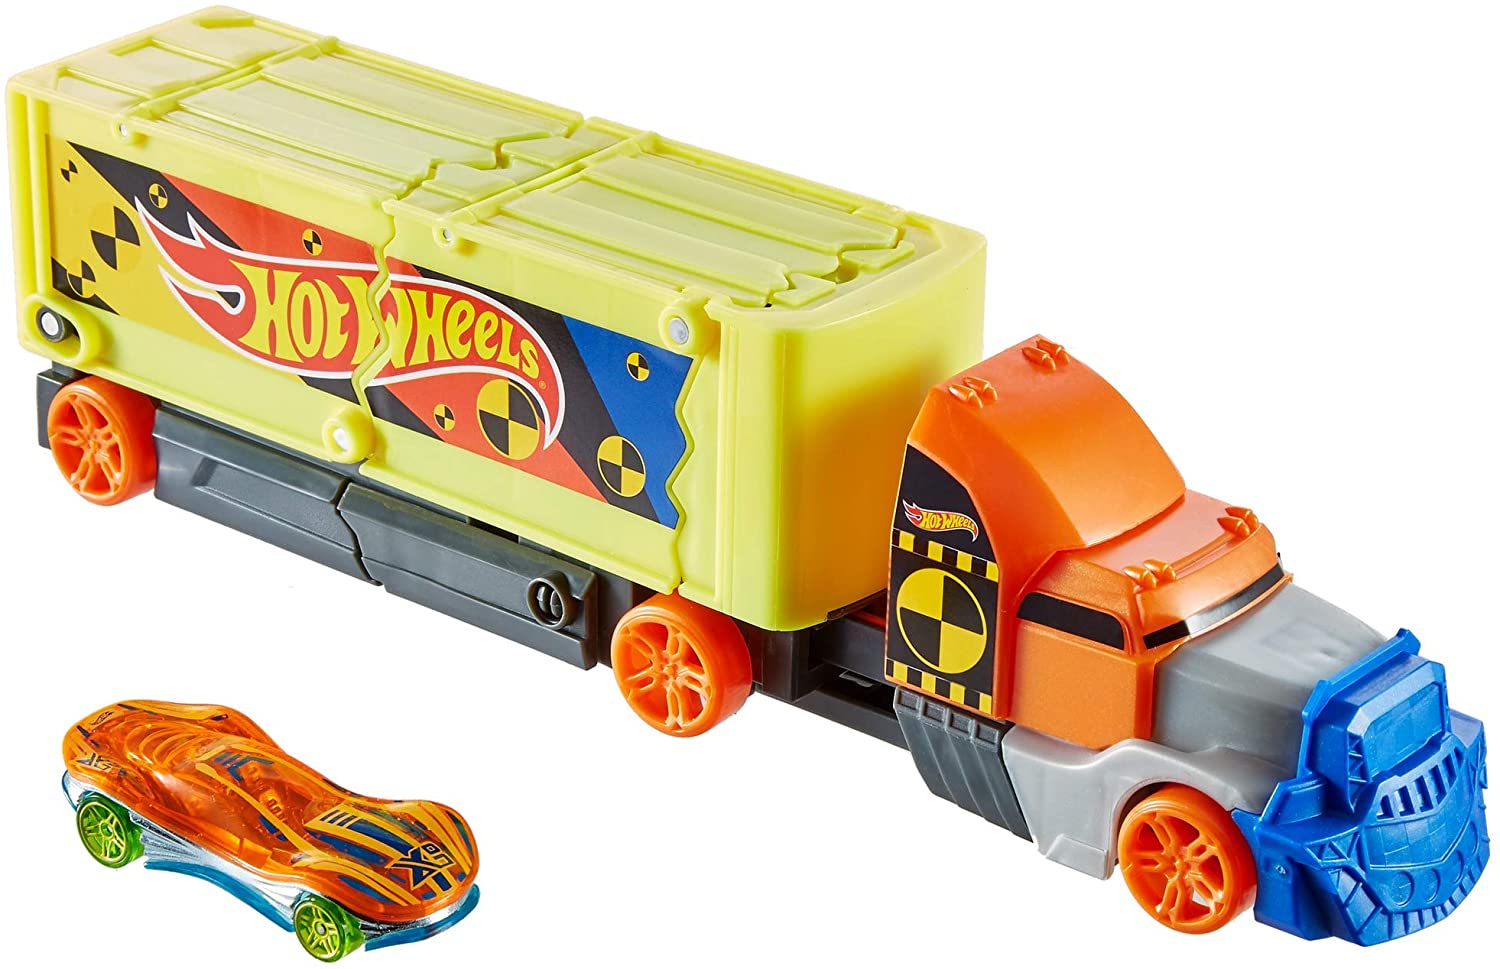 Hot Wheels Gck39 Super Stunt Transporter, Car Toy From 3 Years